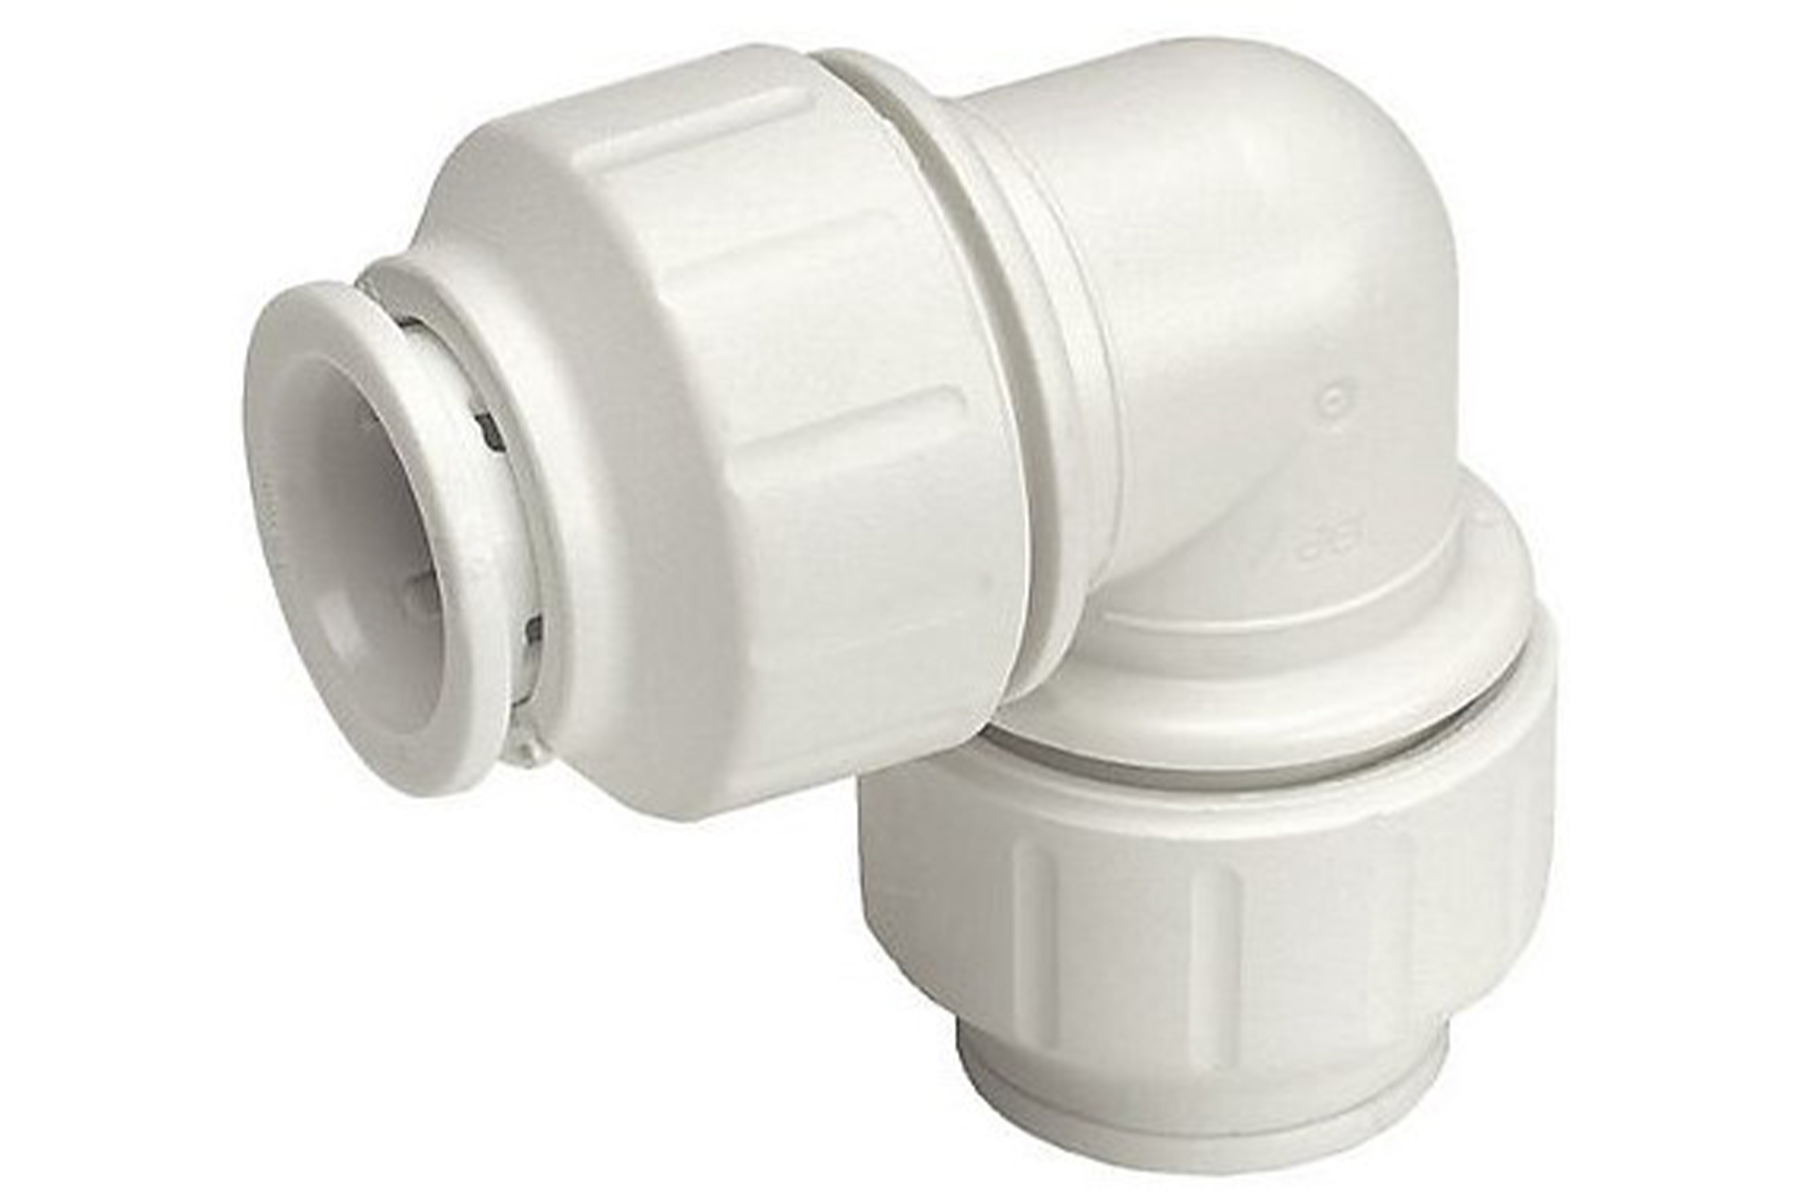 Plastic Plumbing Pipe and Fittings